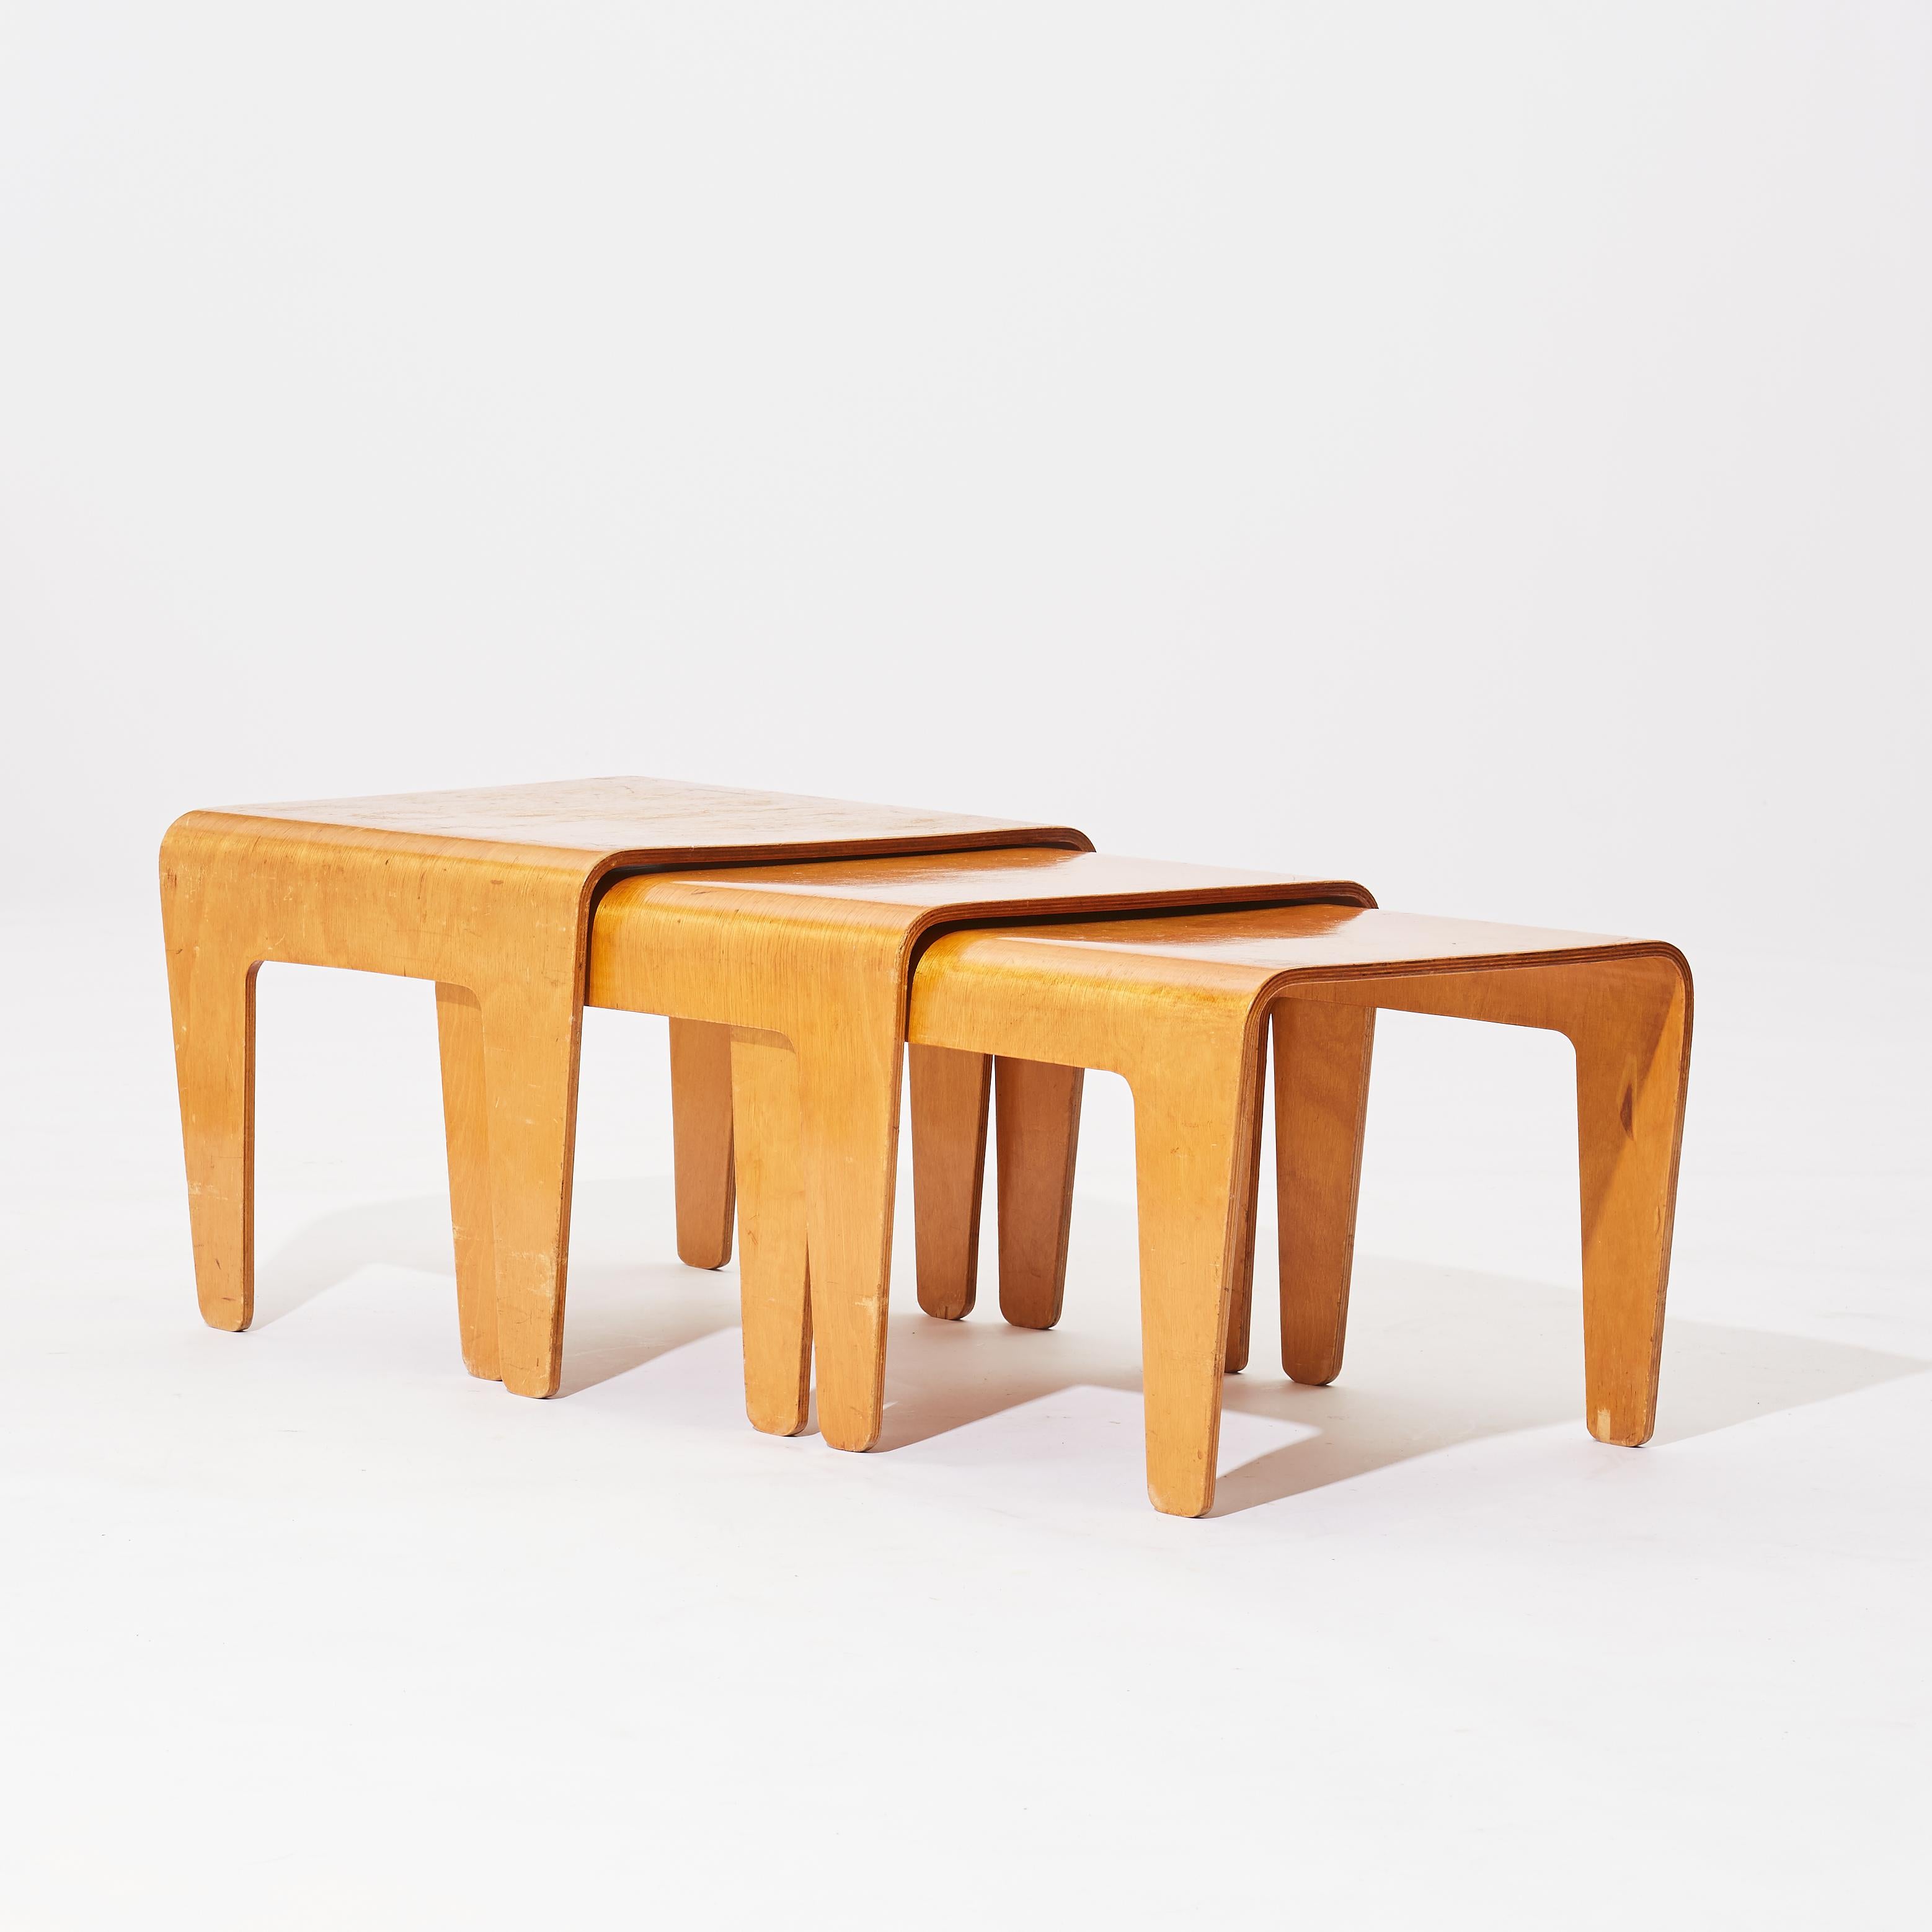 Set of three nesting tables designed by Marcel Breuer for Isokon Furniture Company, in London in 1930s. Manufactured in beech plywood.